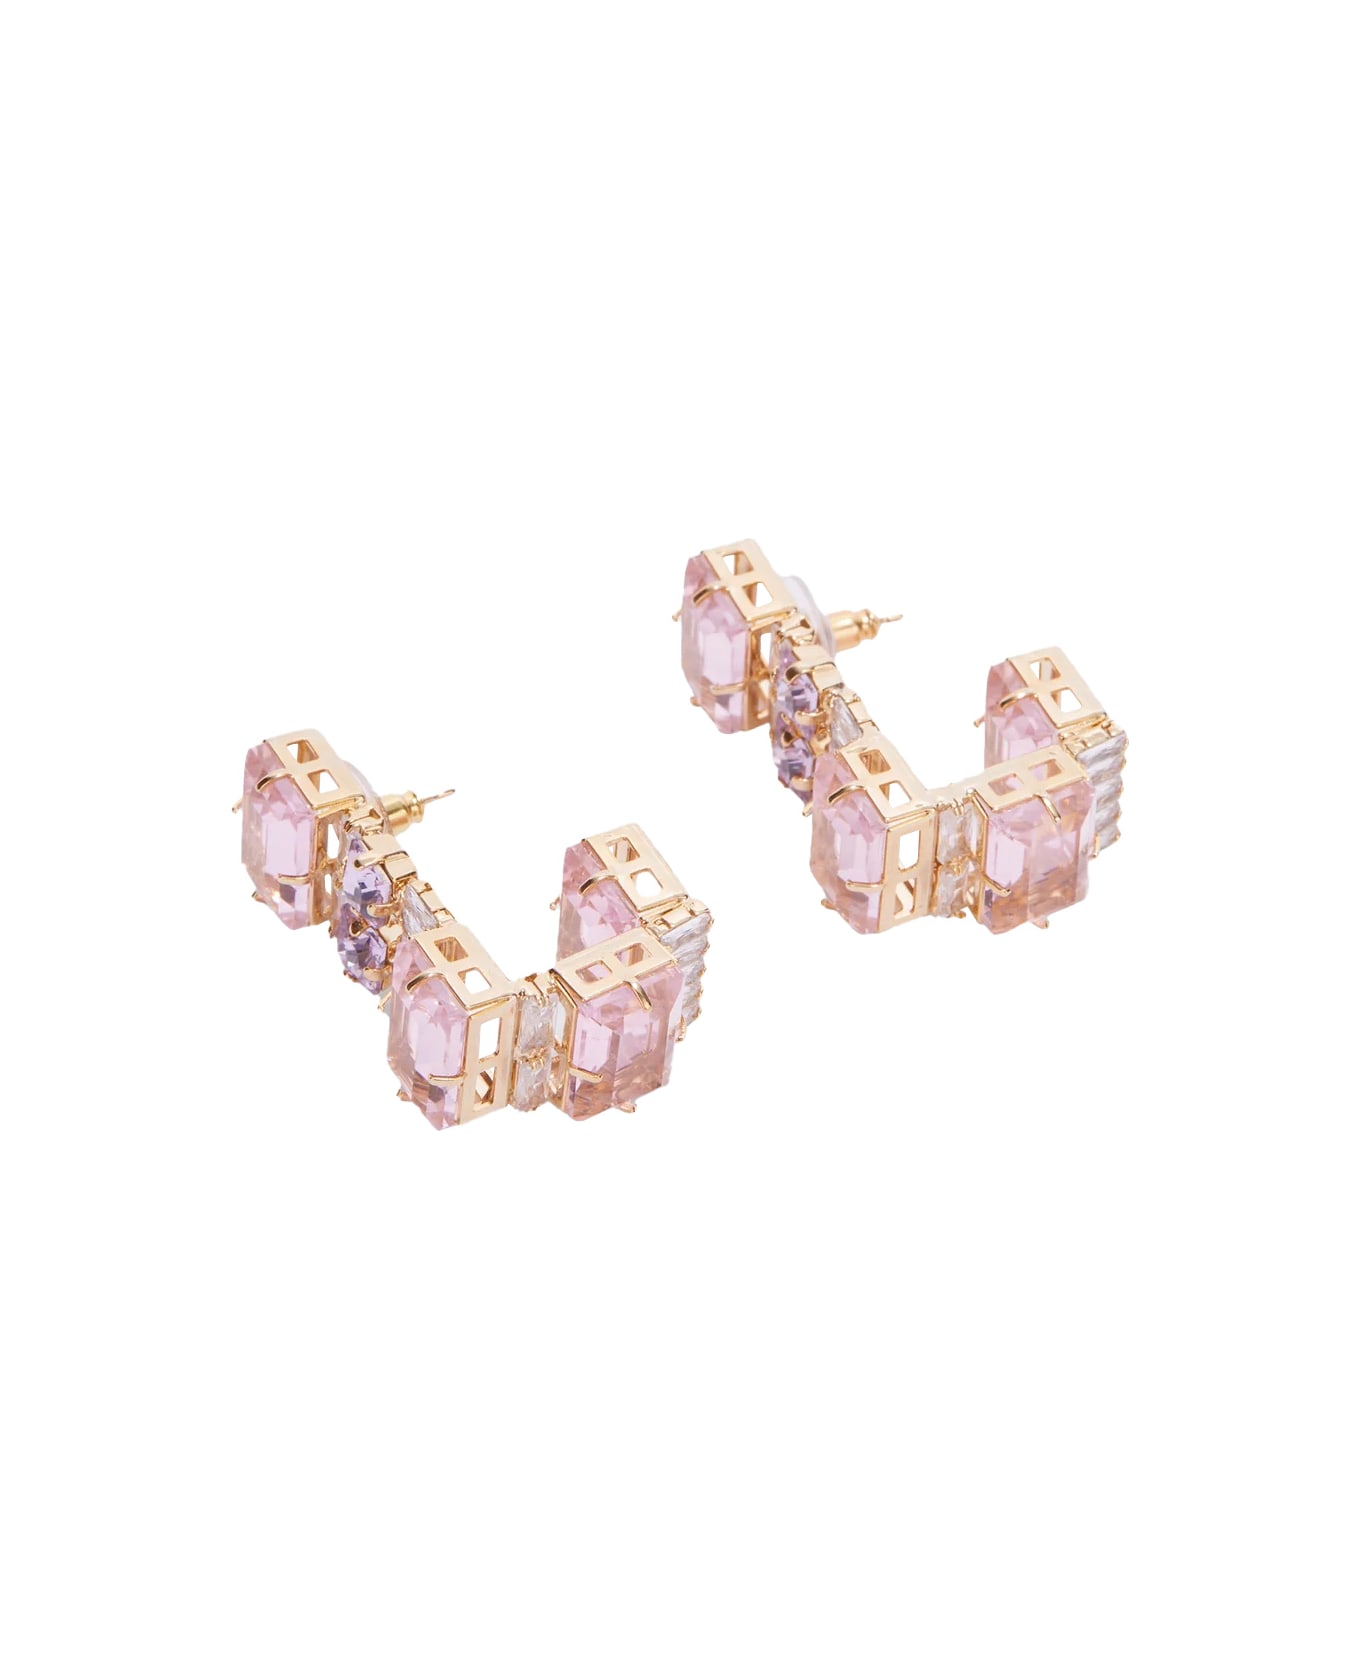 Ermanno Scervino Earrings With Pink Stones - Pink イヤリング